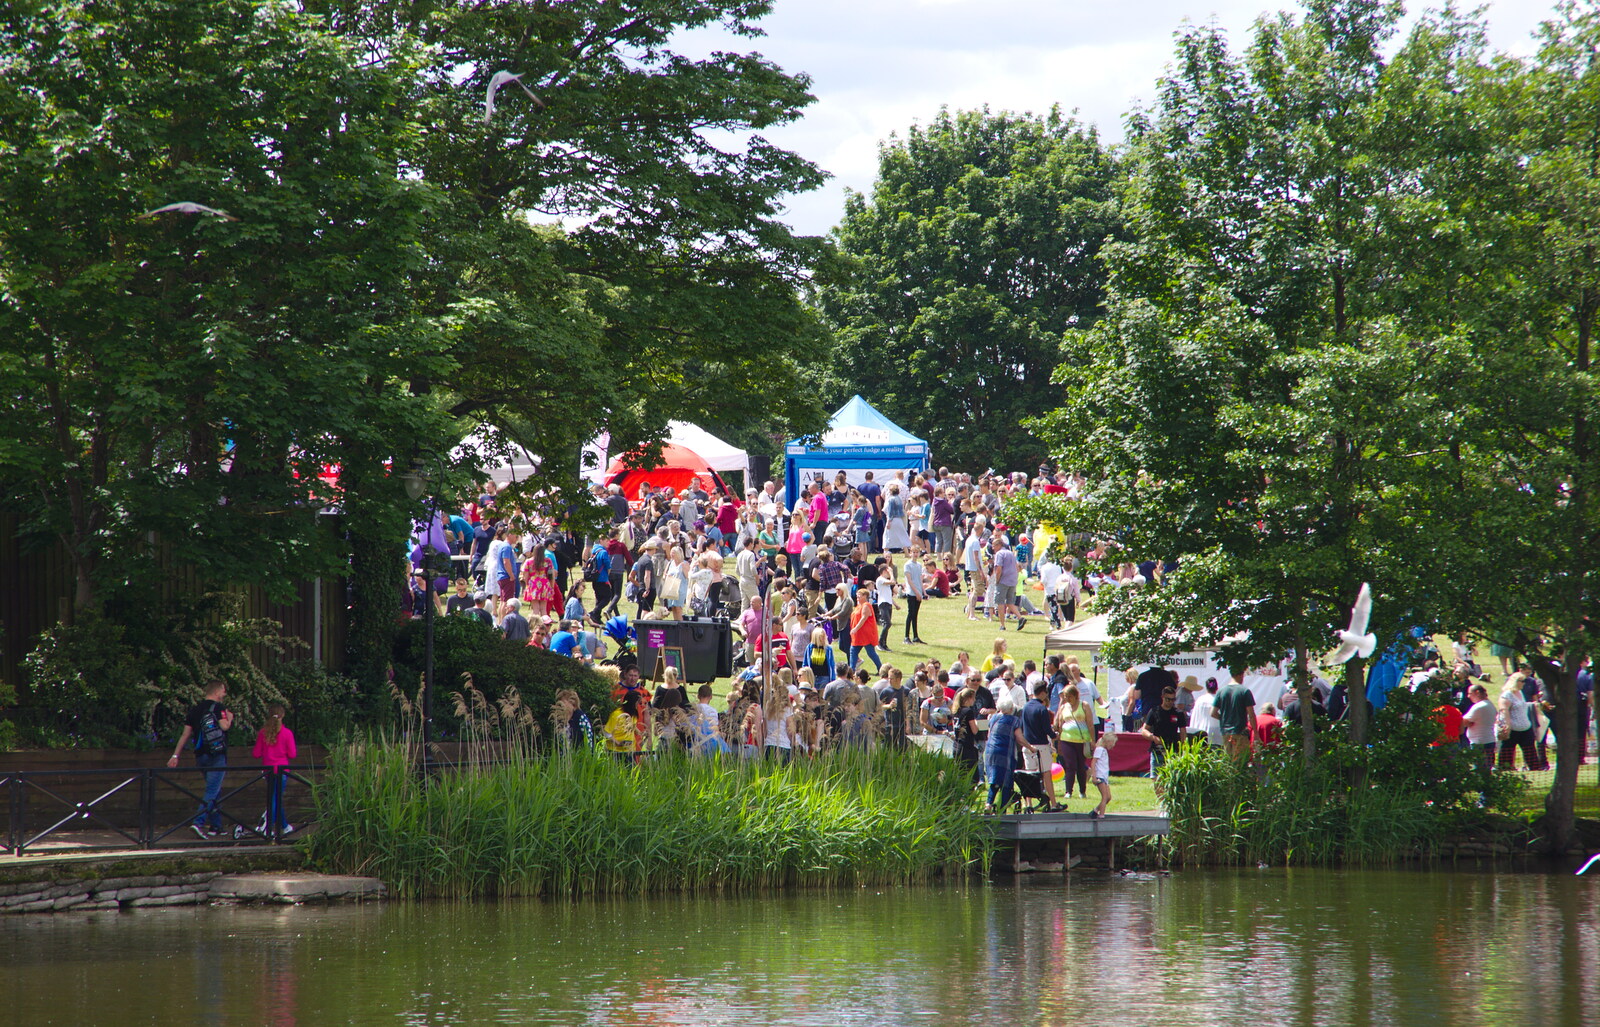 A view of the park from The Diss Carnival 2019, Diss, Norfolk - 9th June 2019